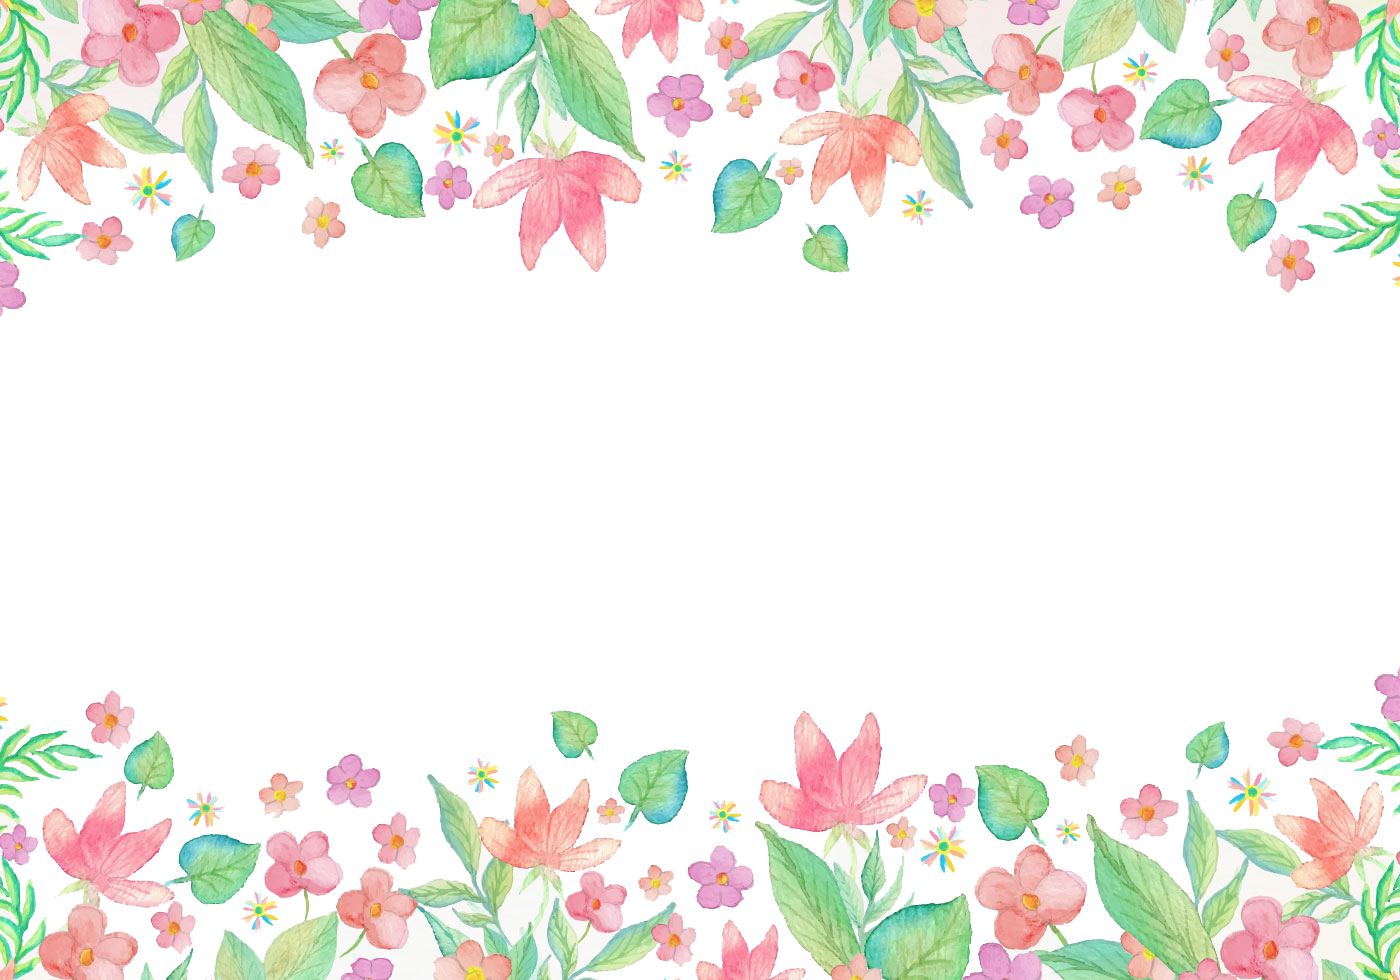 Frame Flowers HQ Image Free PNG PNG Image